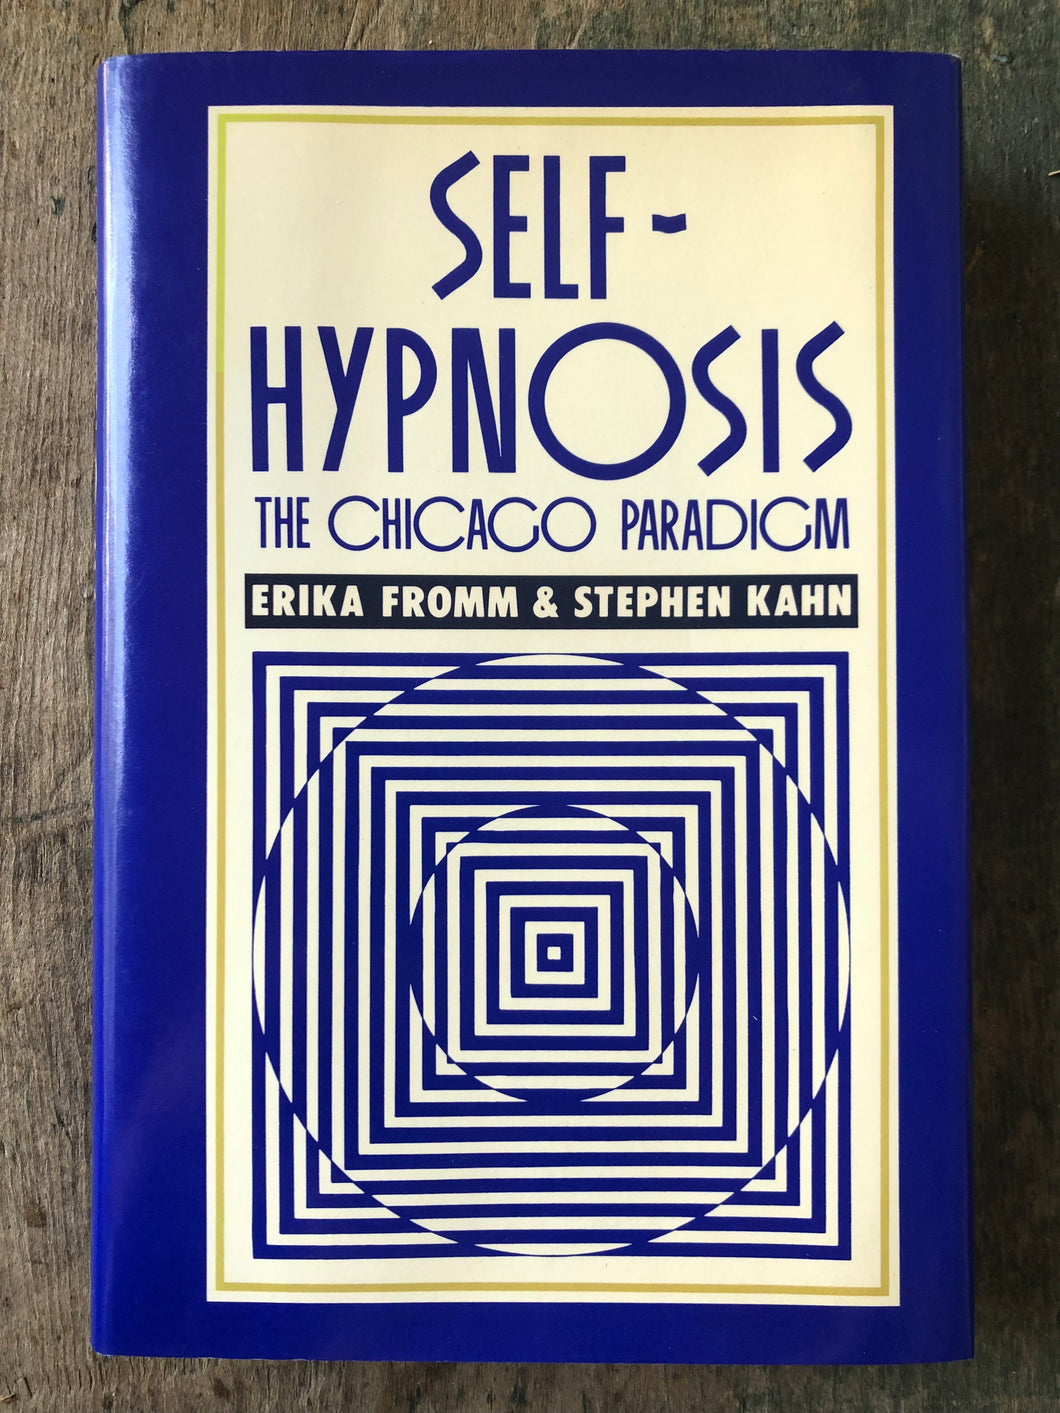 Self-Hypnosis: The Chicago Paradigm. by Erika Fromm and Stephen Kahn